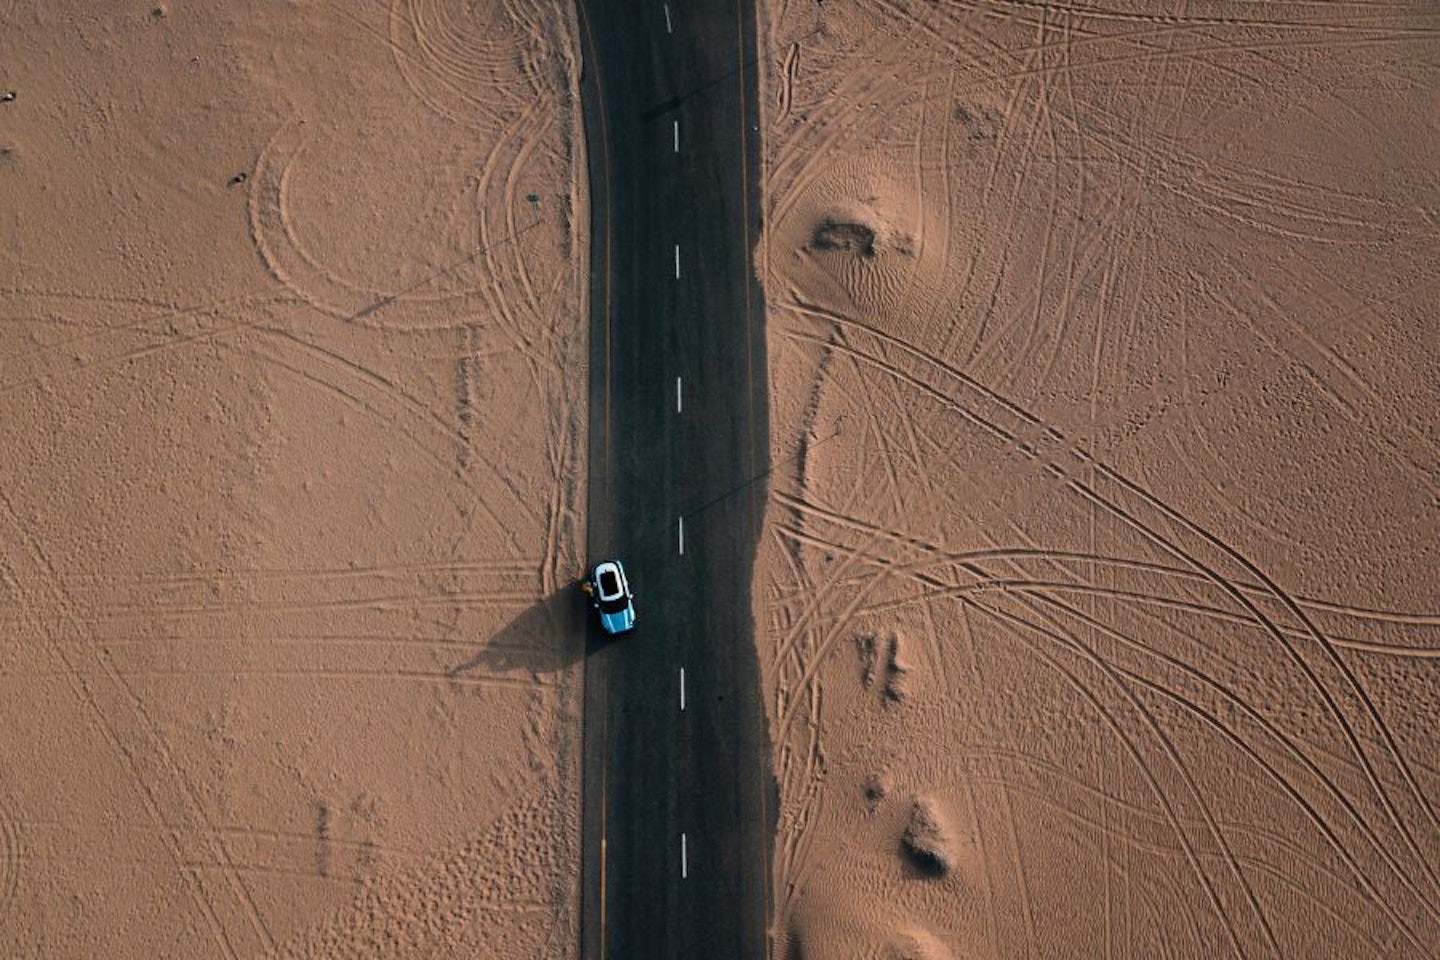 Car shot by drone